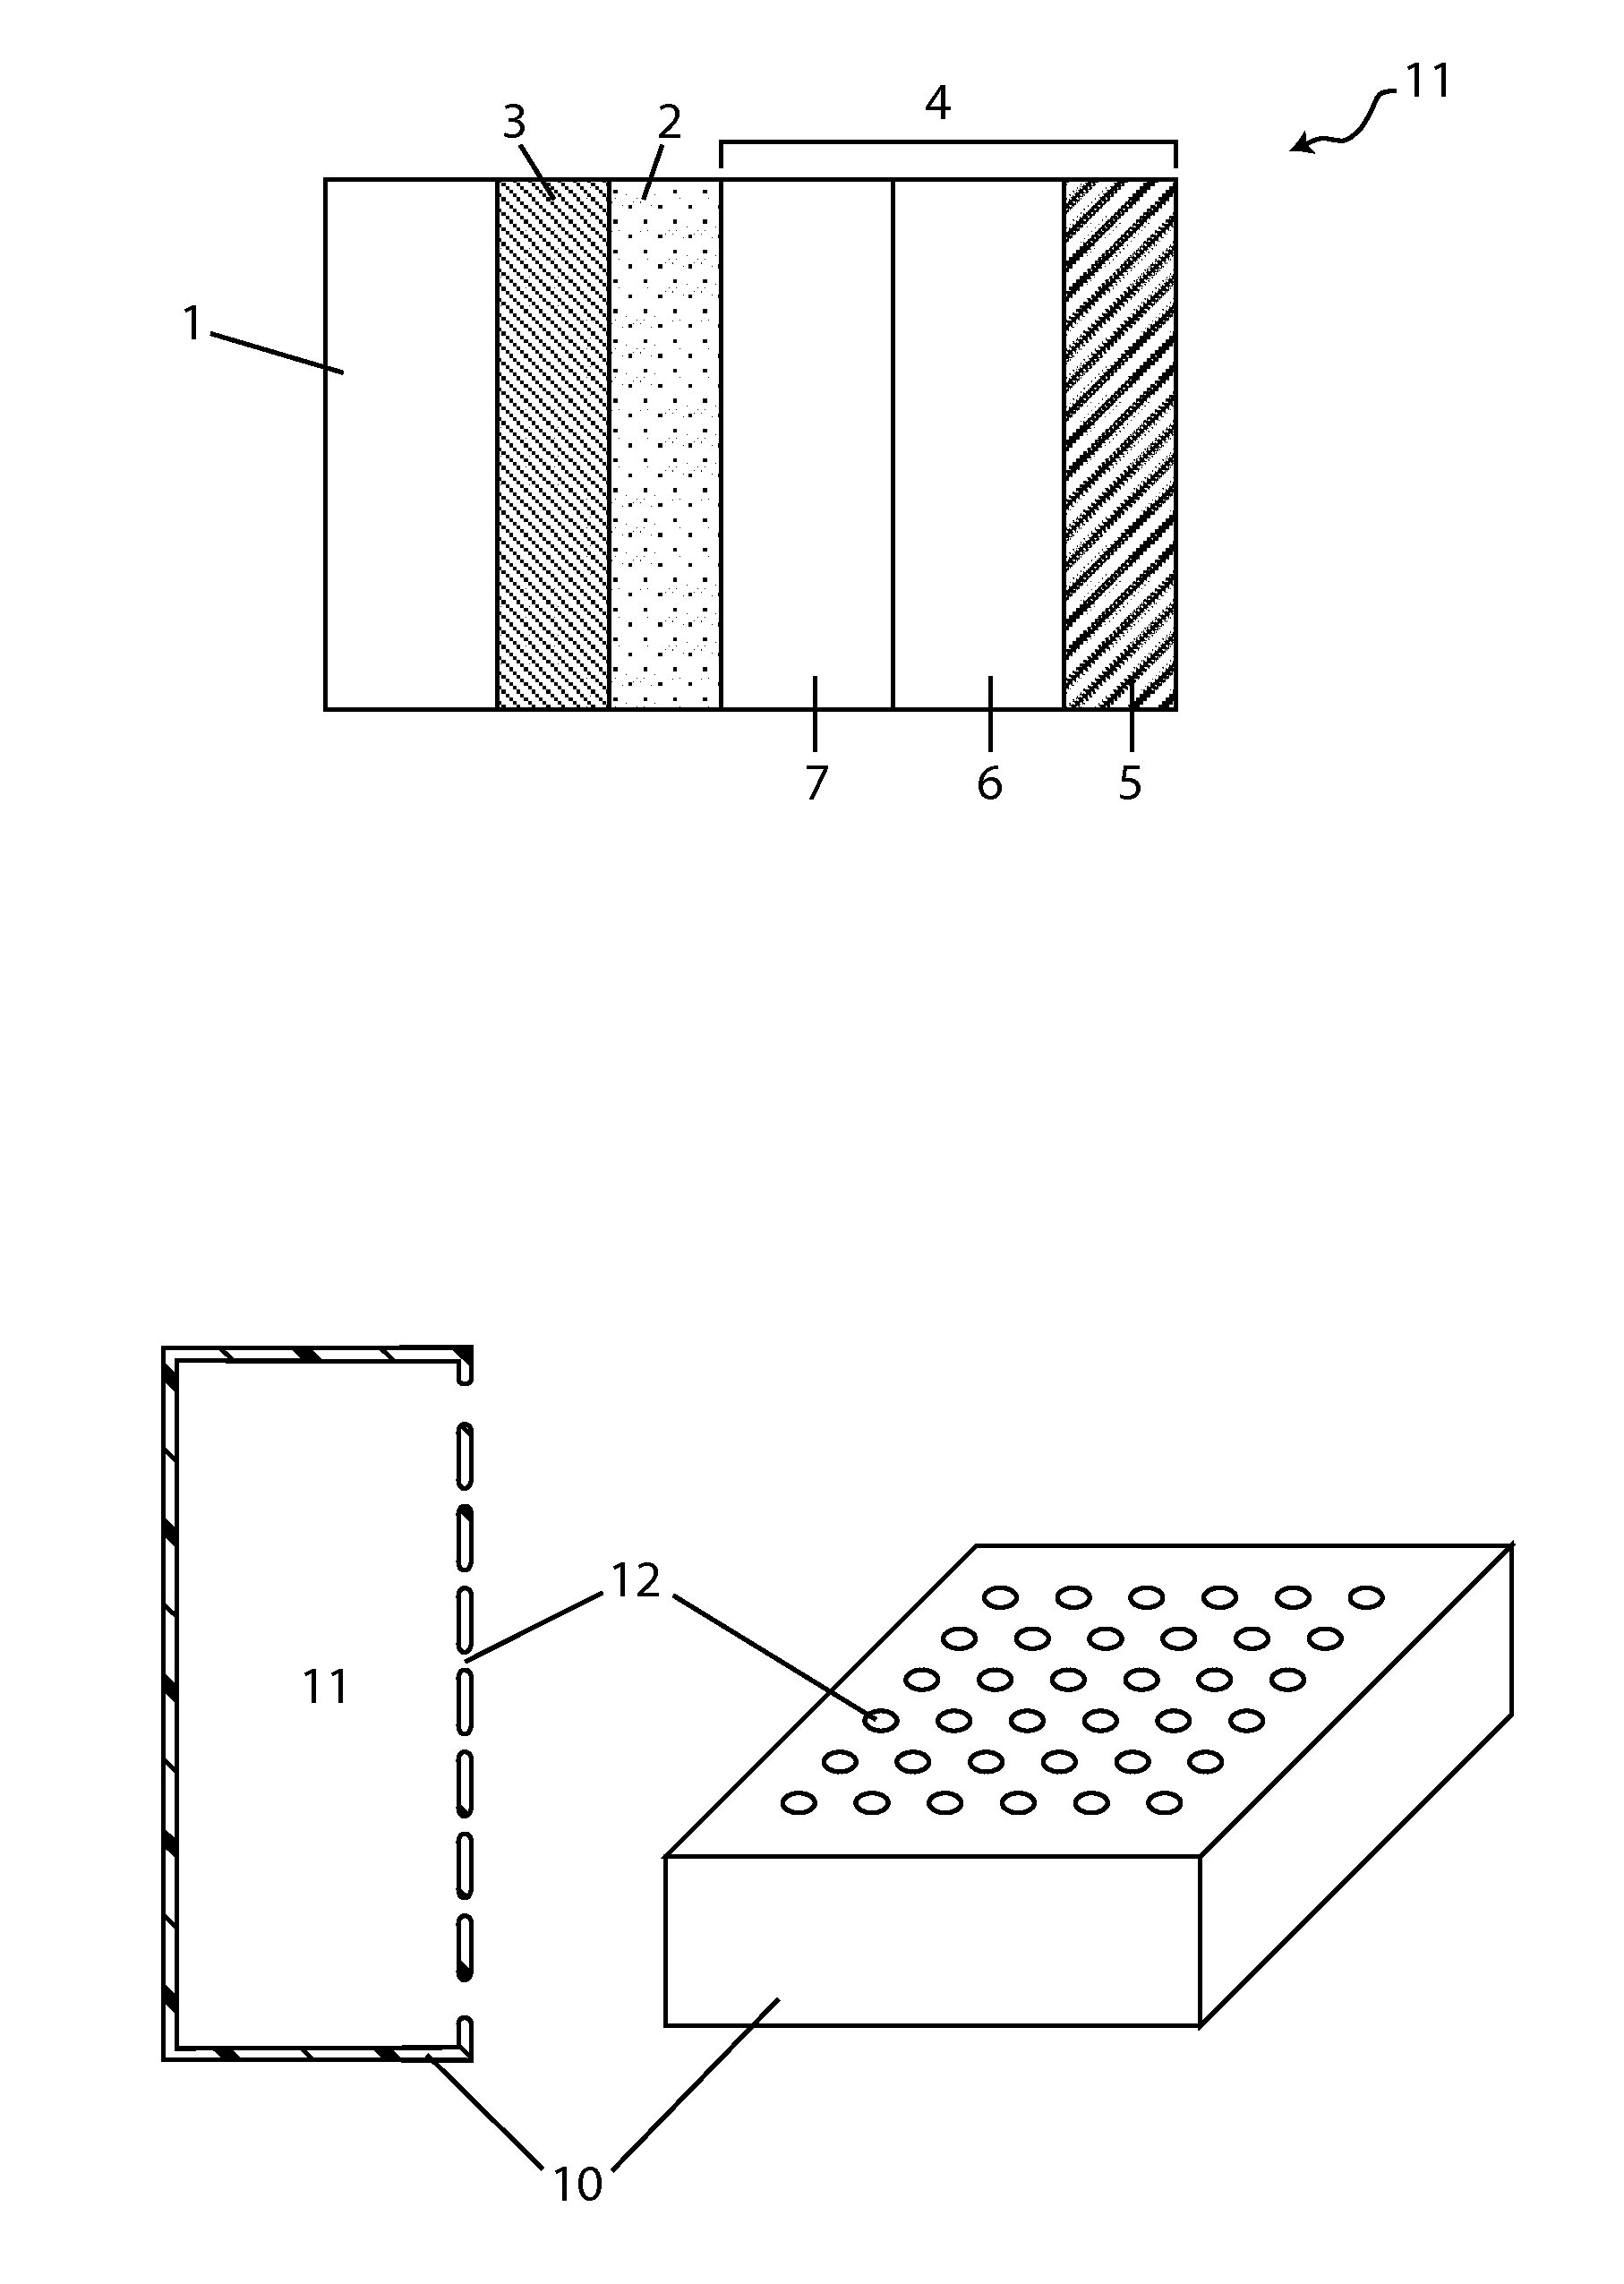 Electrochemical device with protective membrane architecture